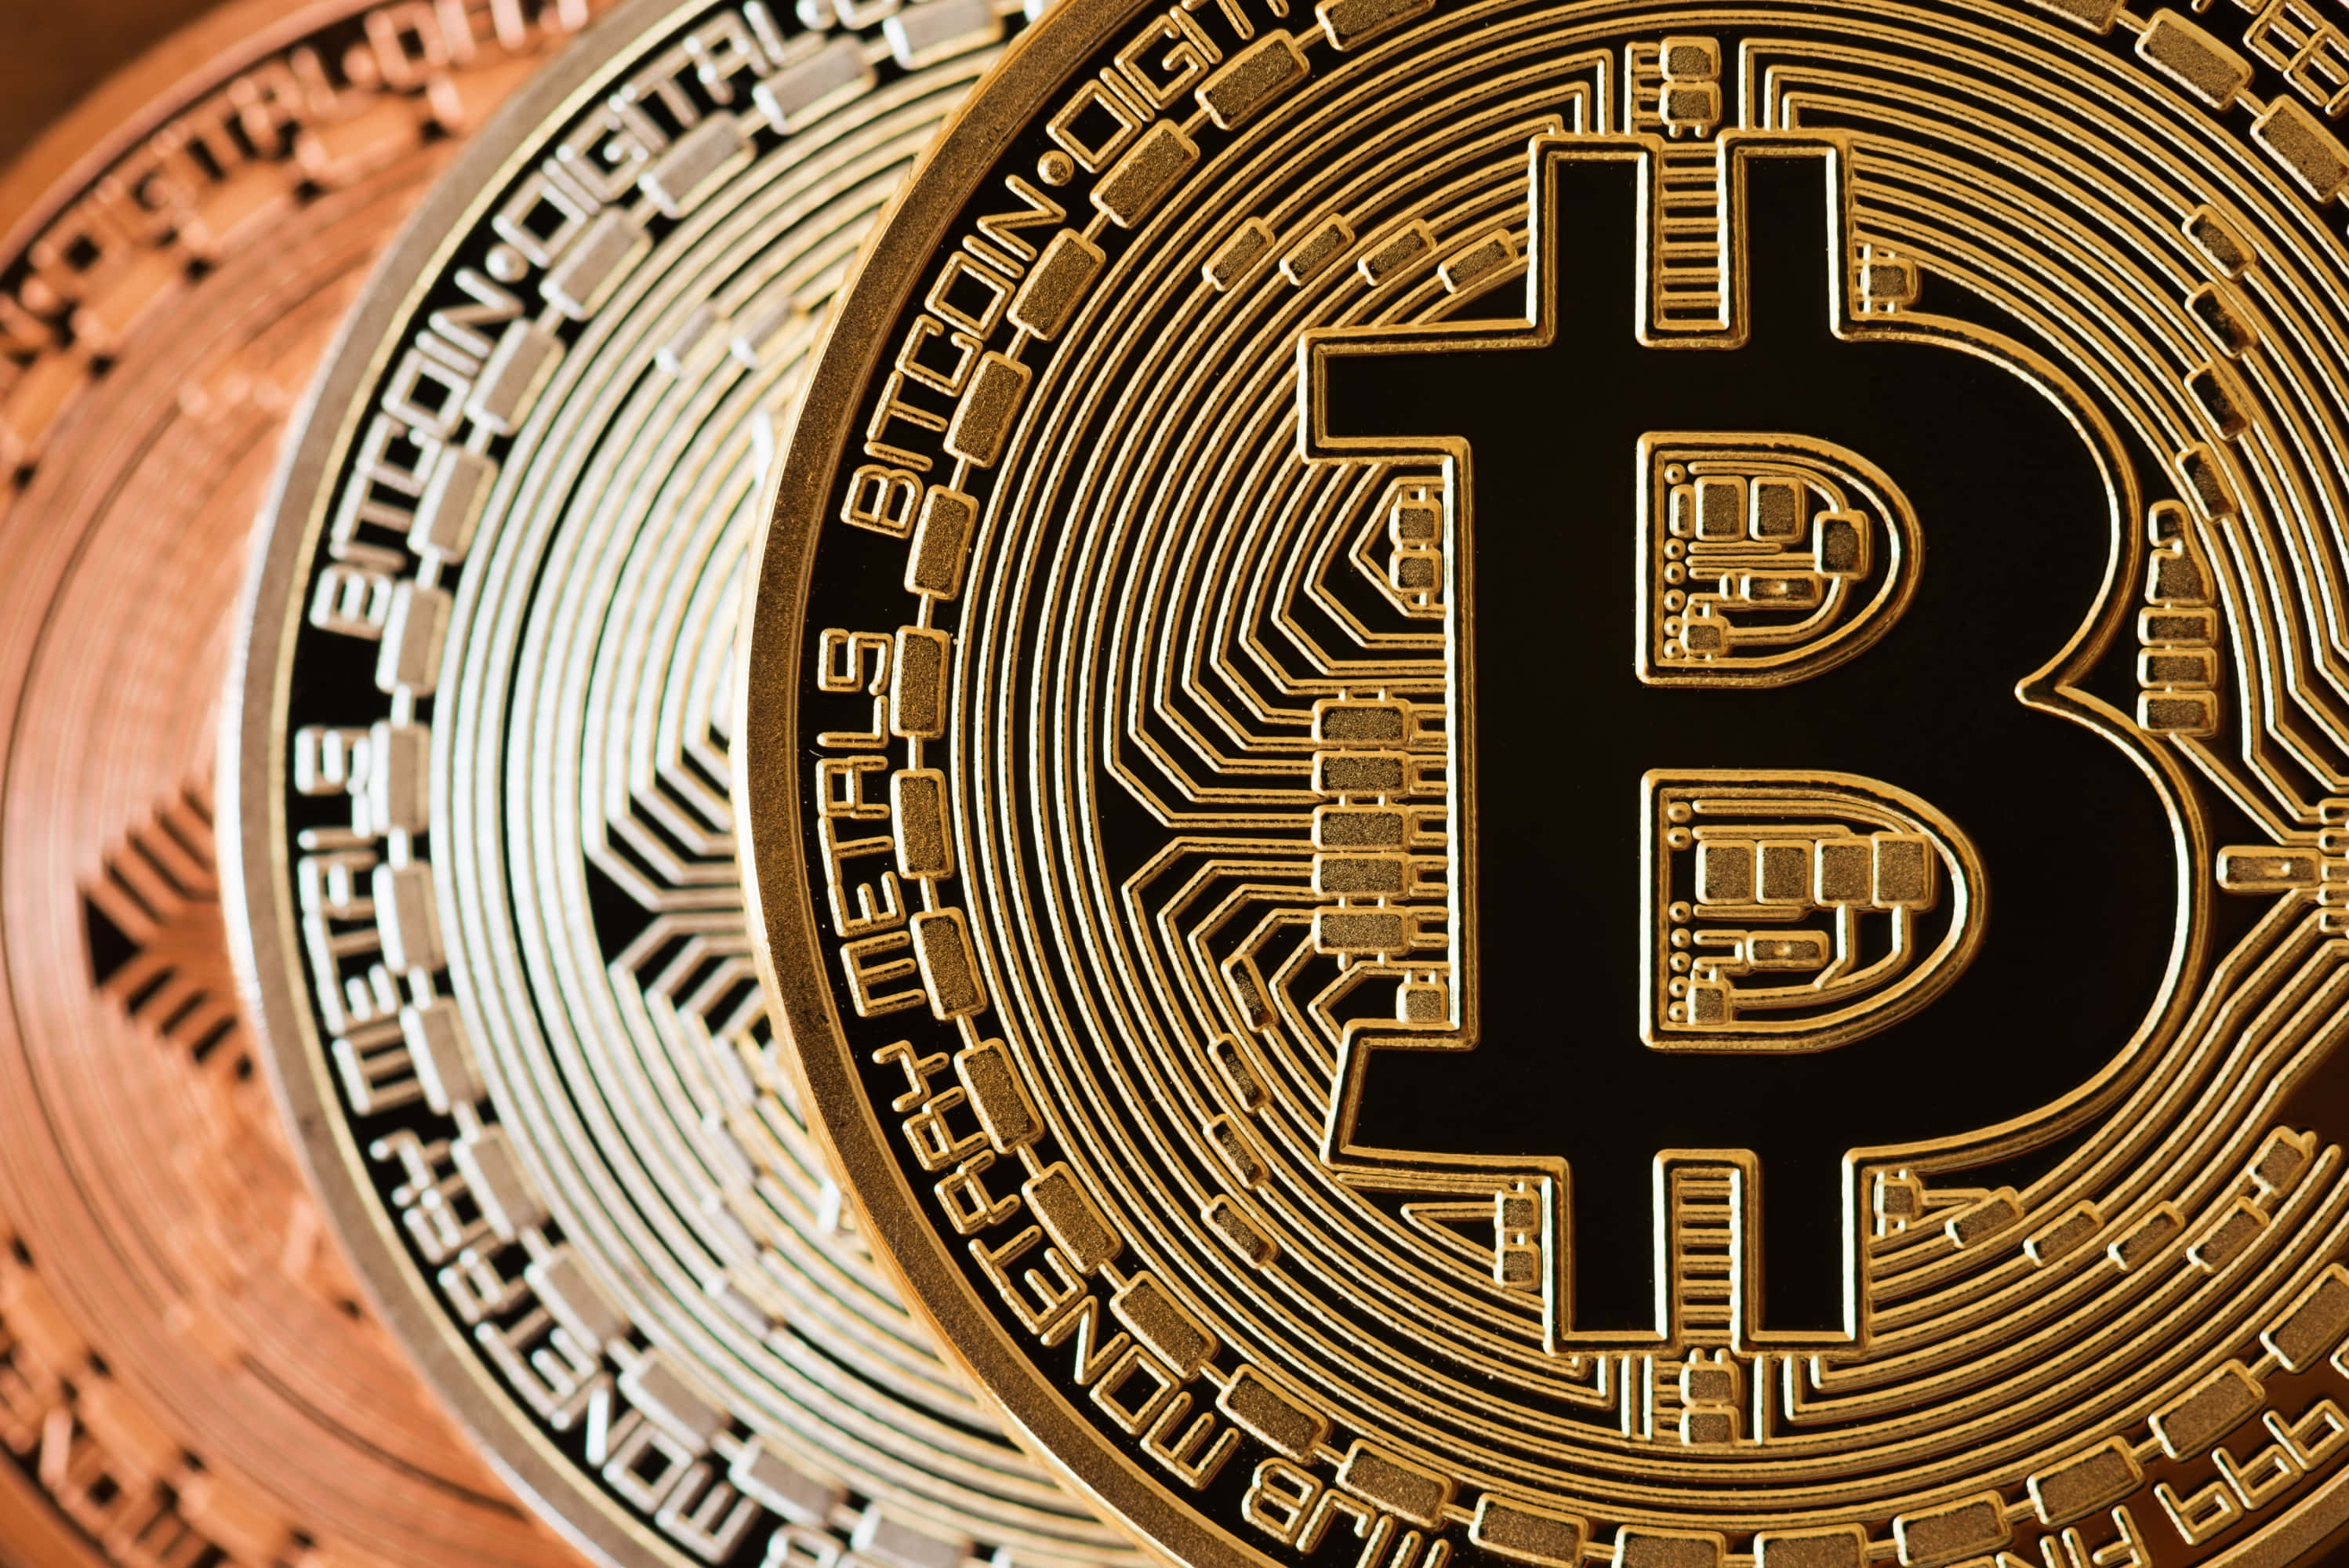 Bitcoins Are Shown In A Row On A Wooden Surface